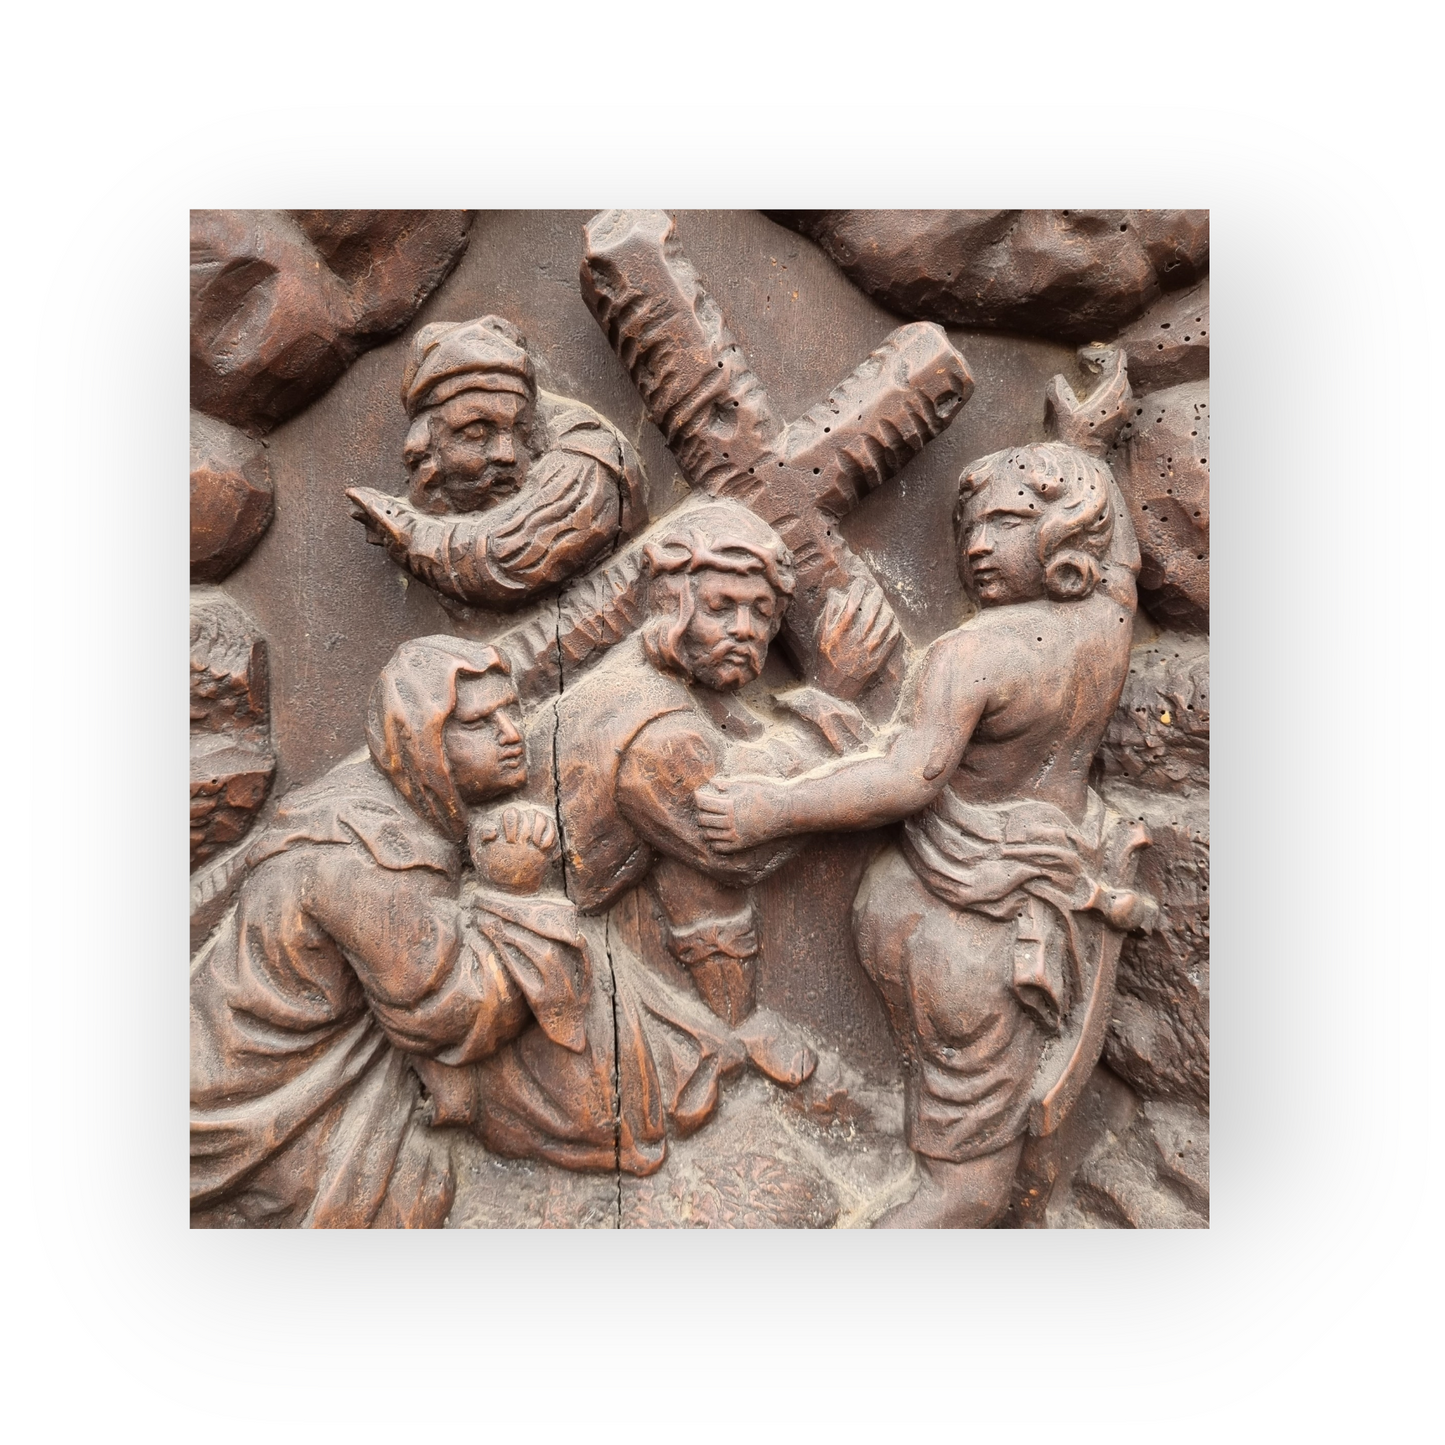 Late 17th Century North European School Antique Carved Wooden Panel Depicting The Road To Calvary